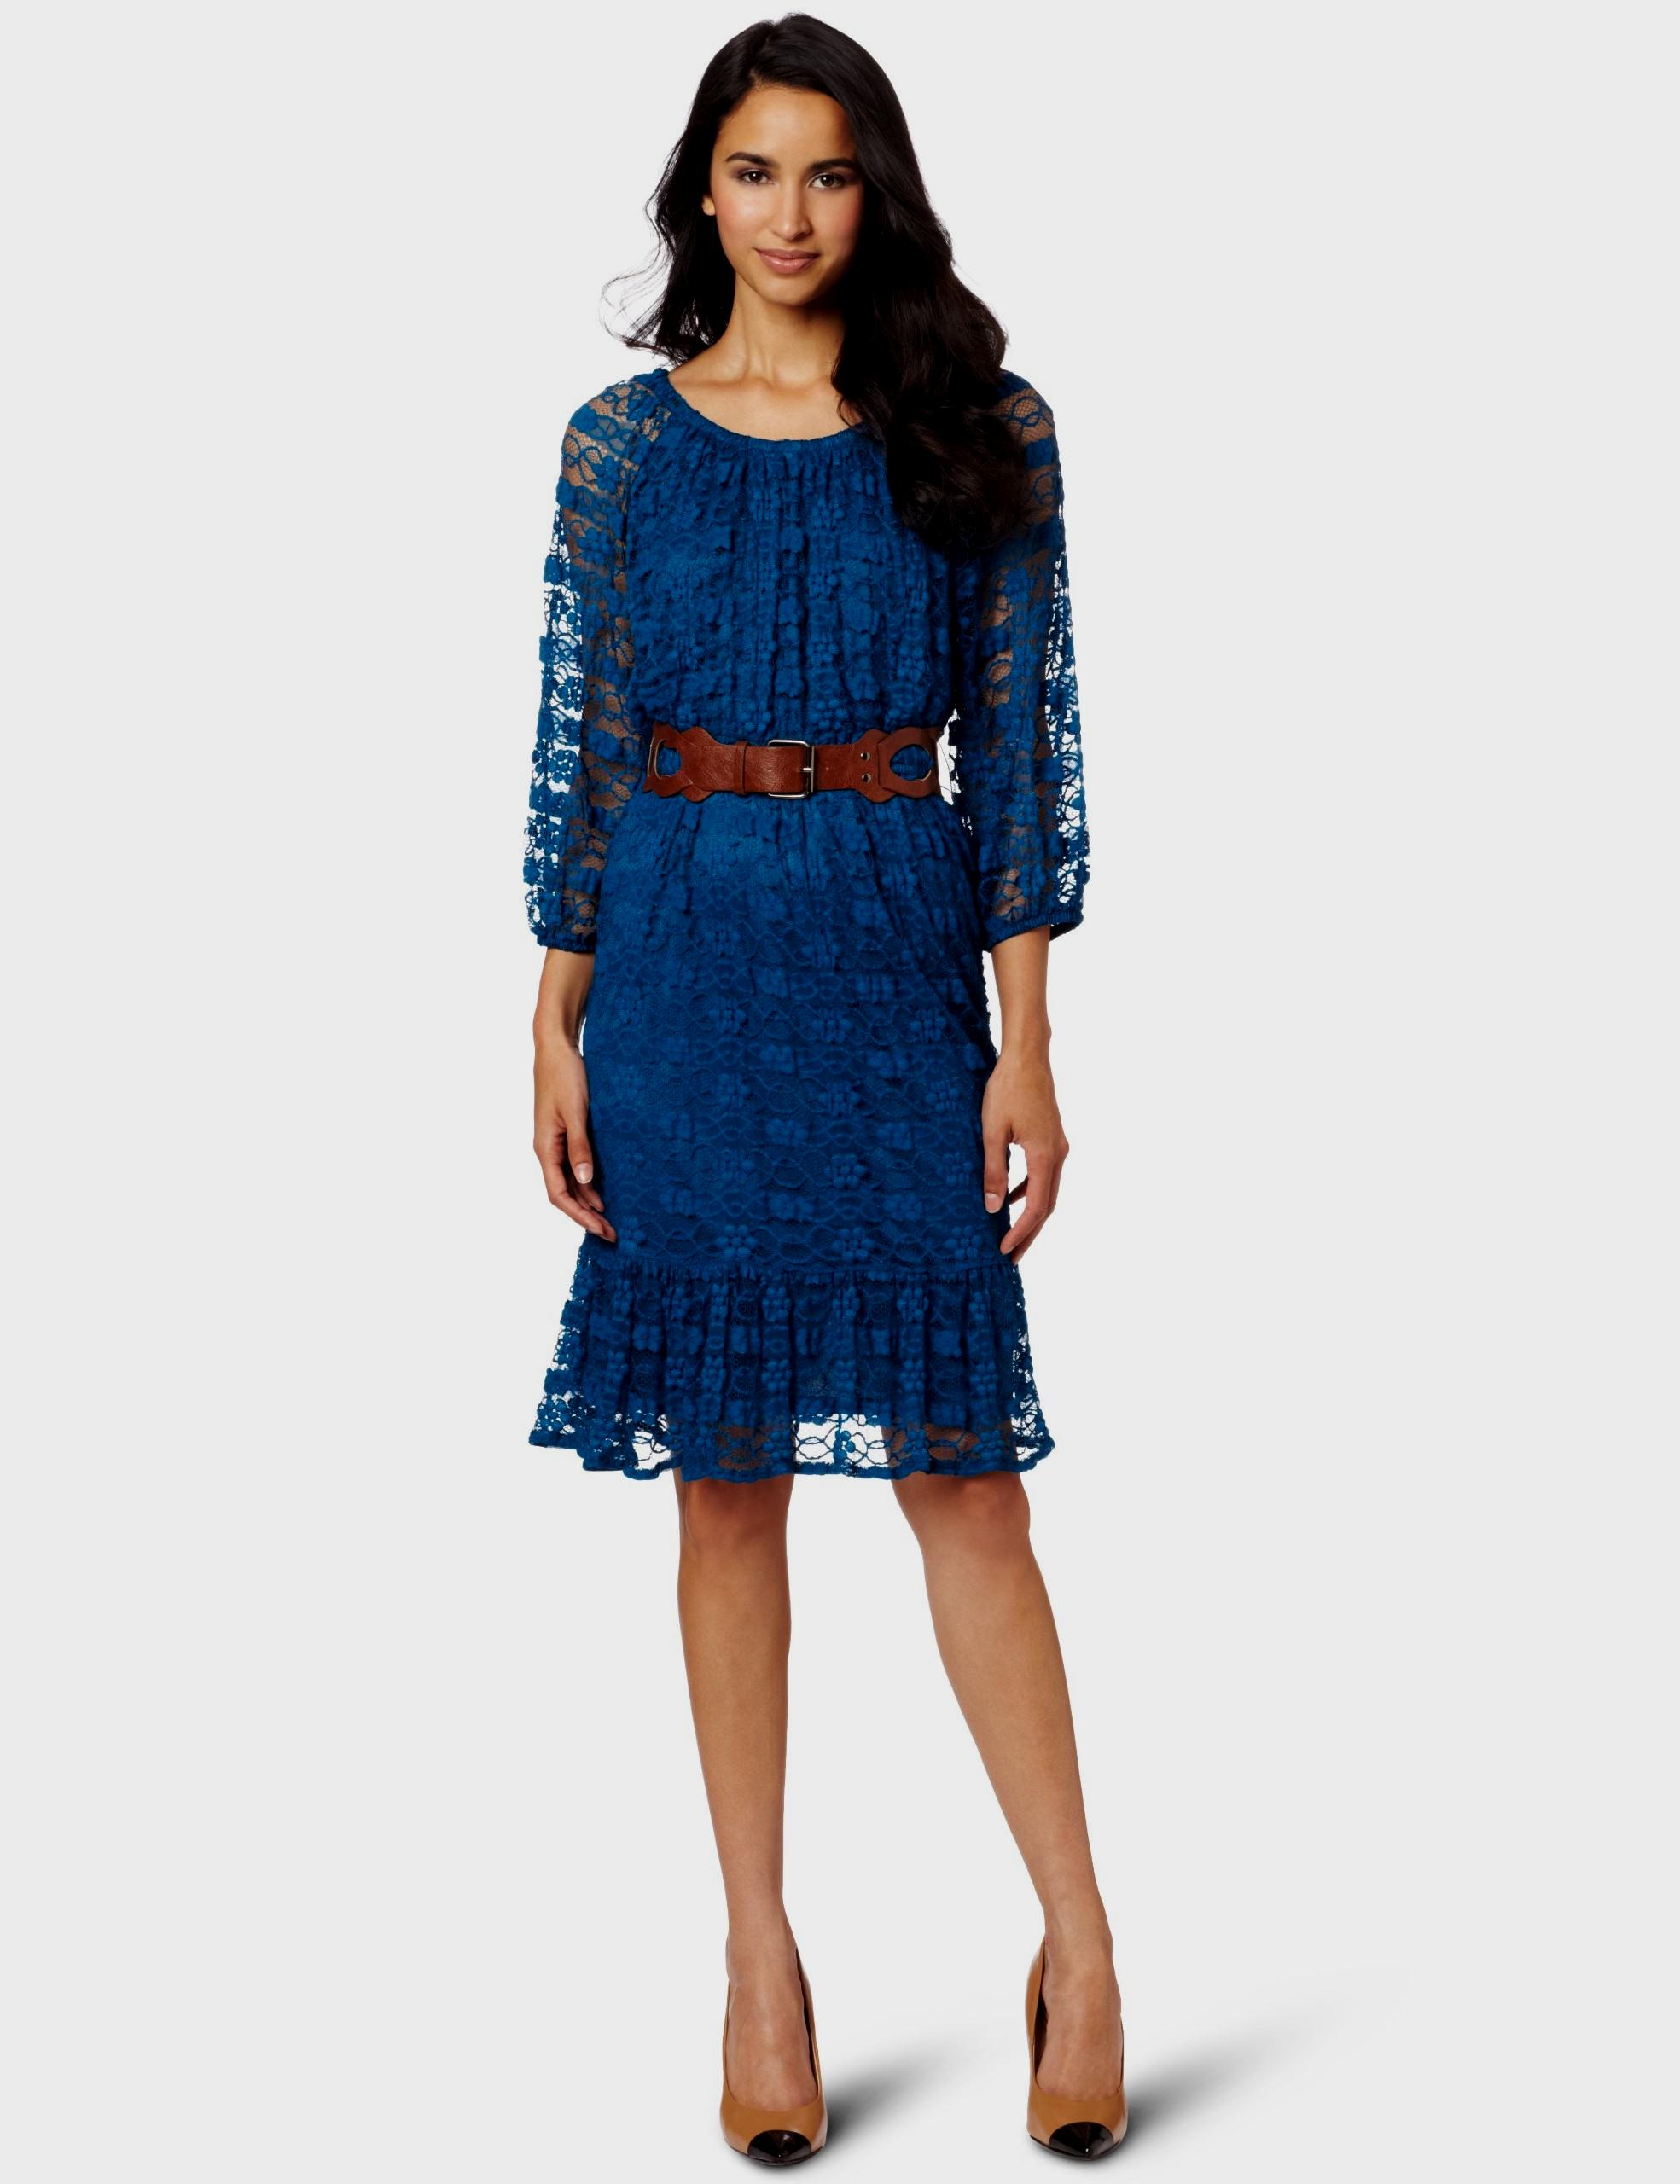 dress for women casual dresses for women re re . YVQZEWX